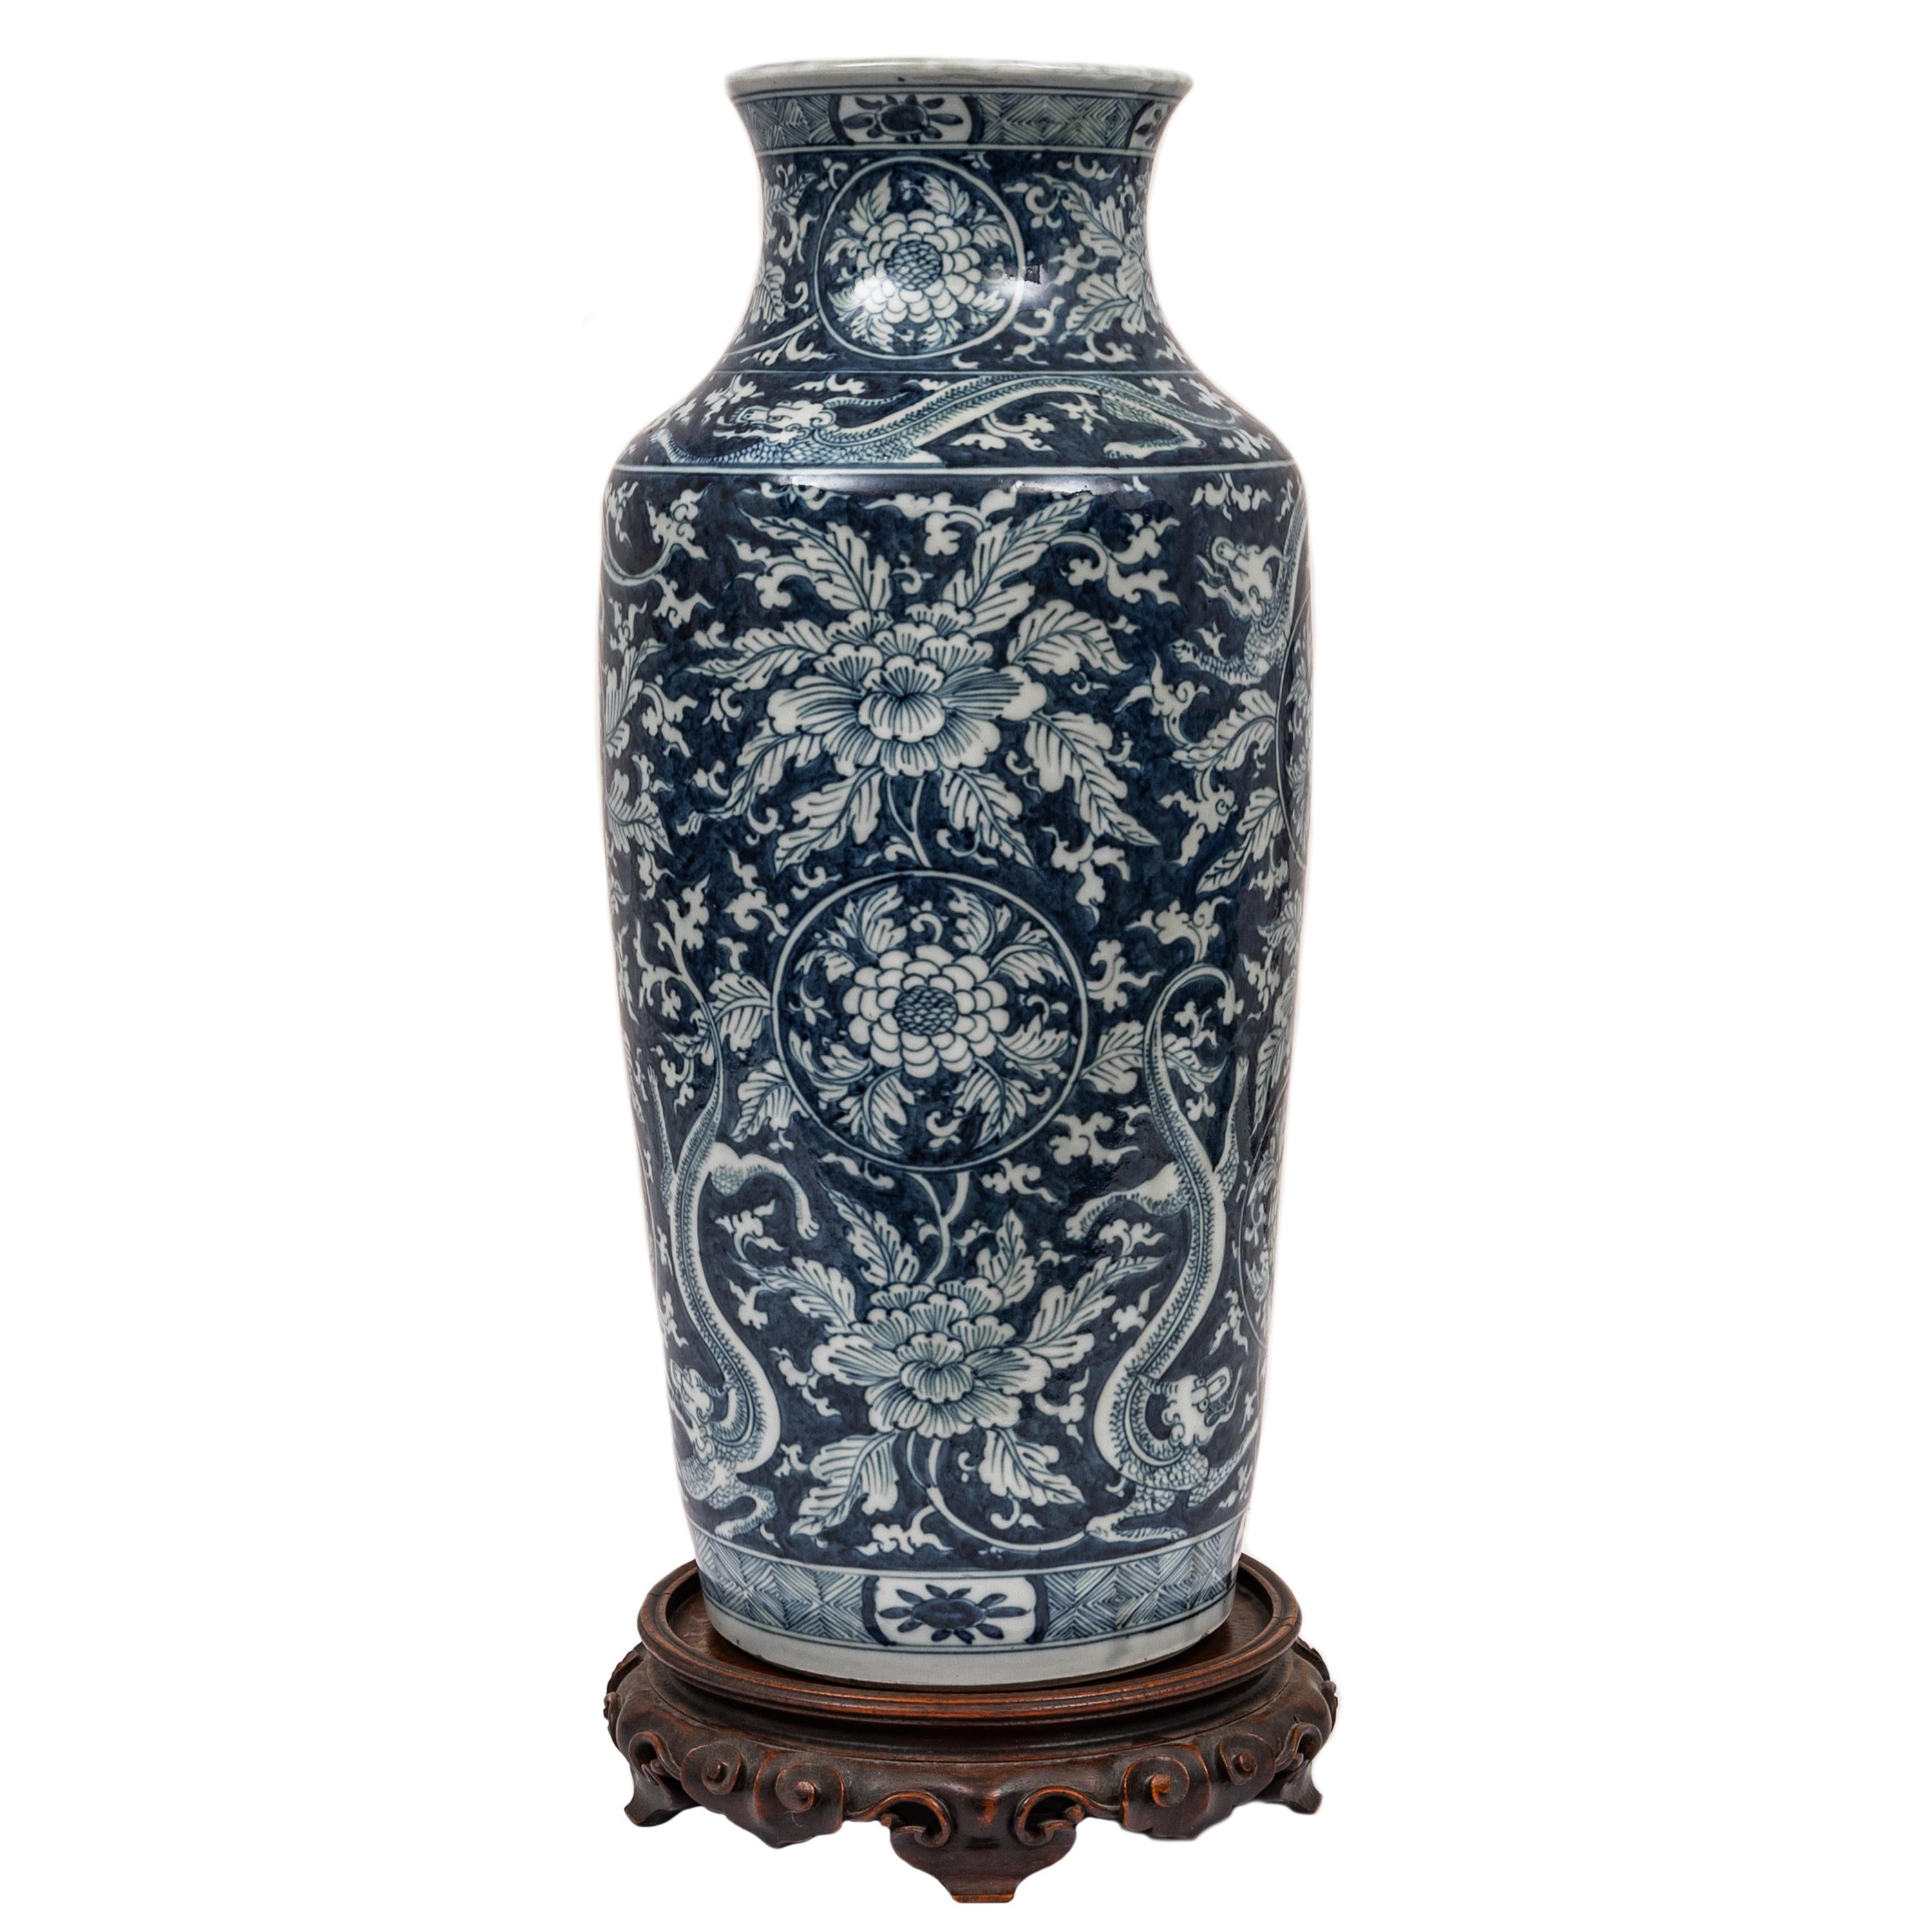 A large and rare antique Chinese Qing Dynasty Blue & White Porcelain Rouleau dragon vase, Kangxi period (1662-1722), the vase dating to the late 1600s.
The vase of slightly tapered cylindrical form, with a broad neck and flared mouth, painted in